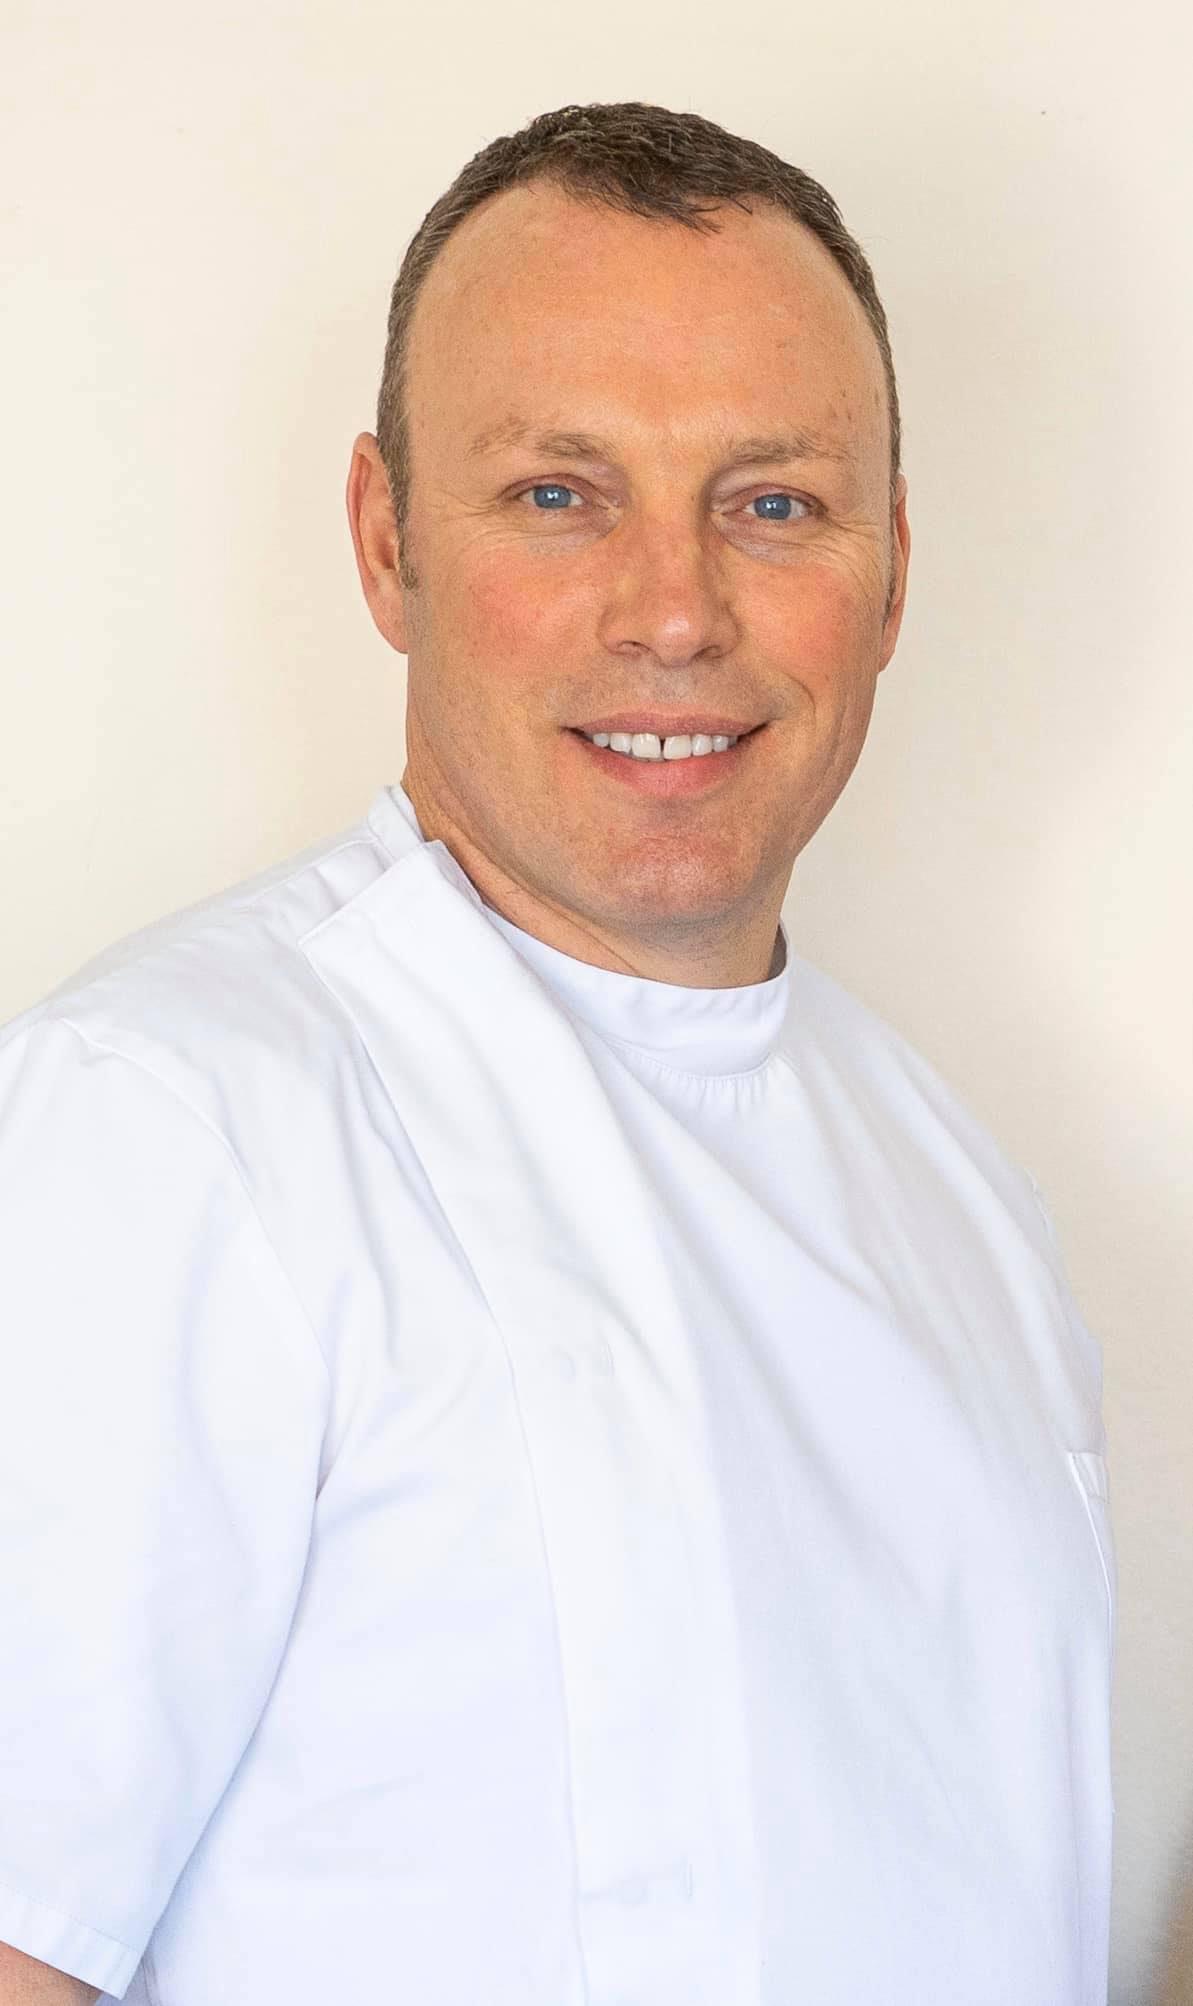 Robert Cartwright of Abbey Osteopathic clinic